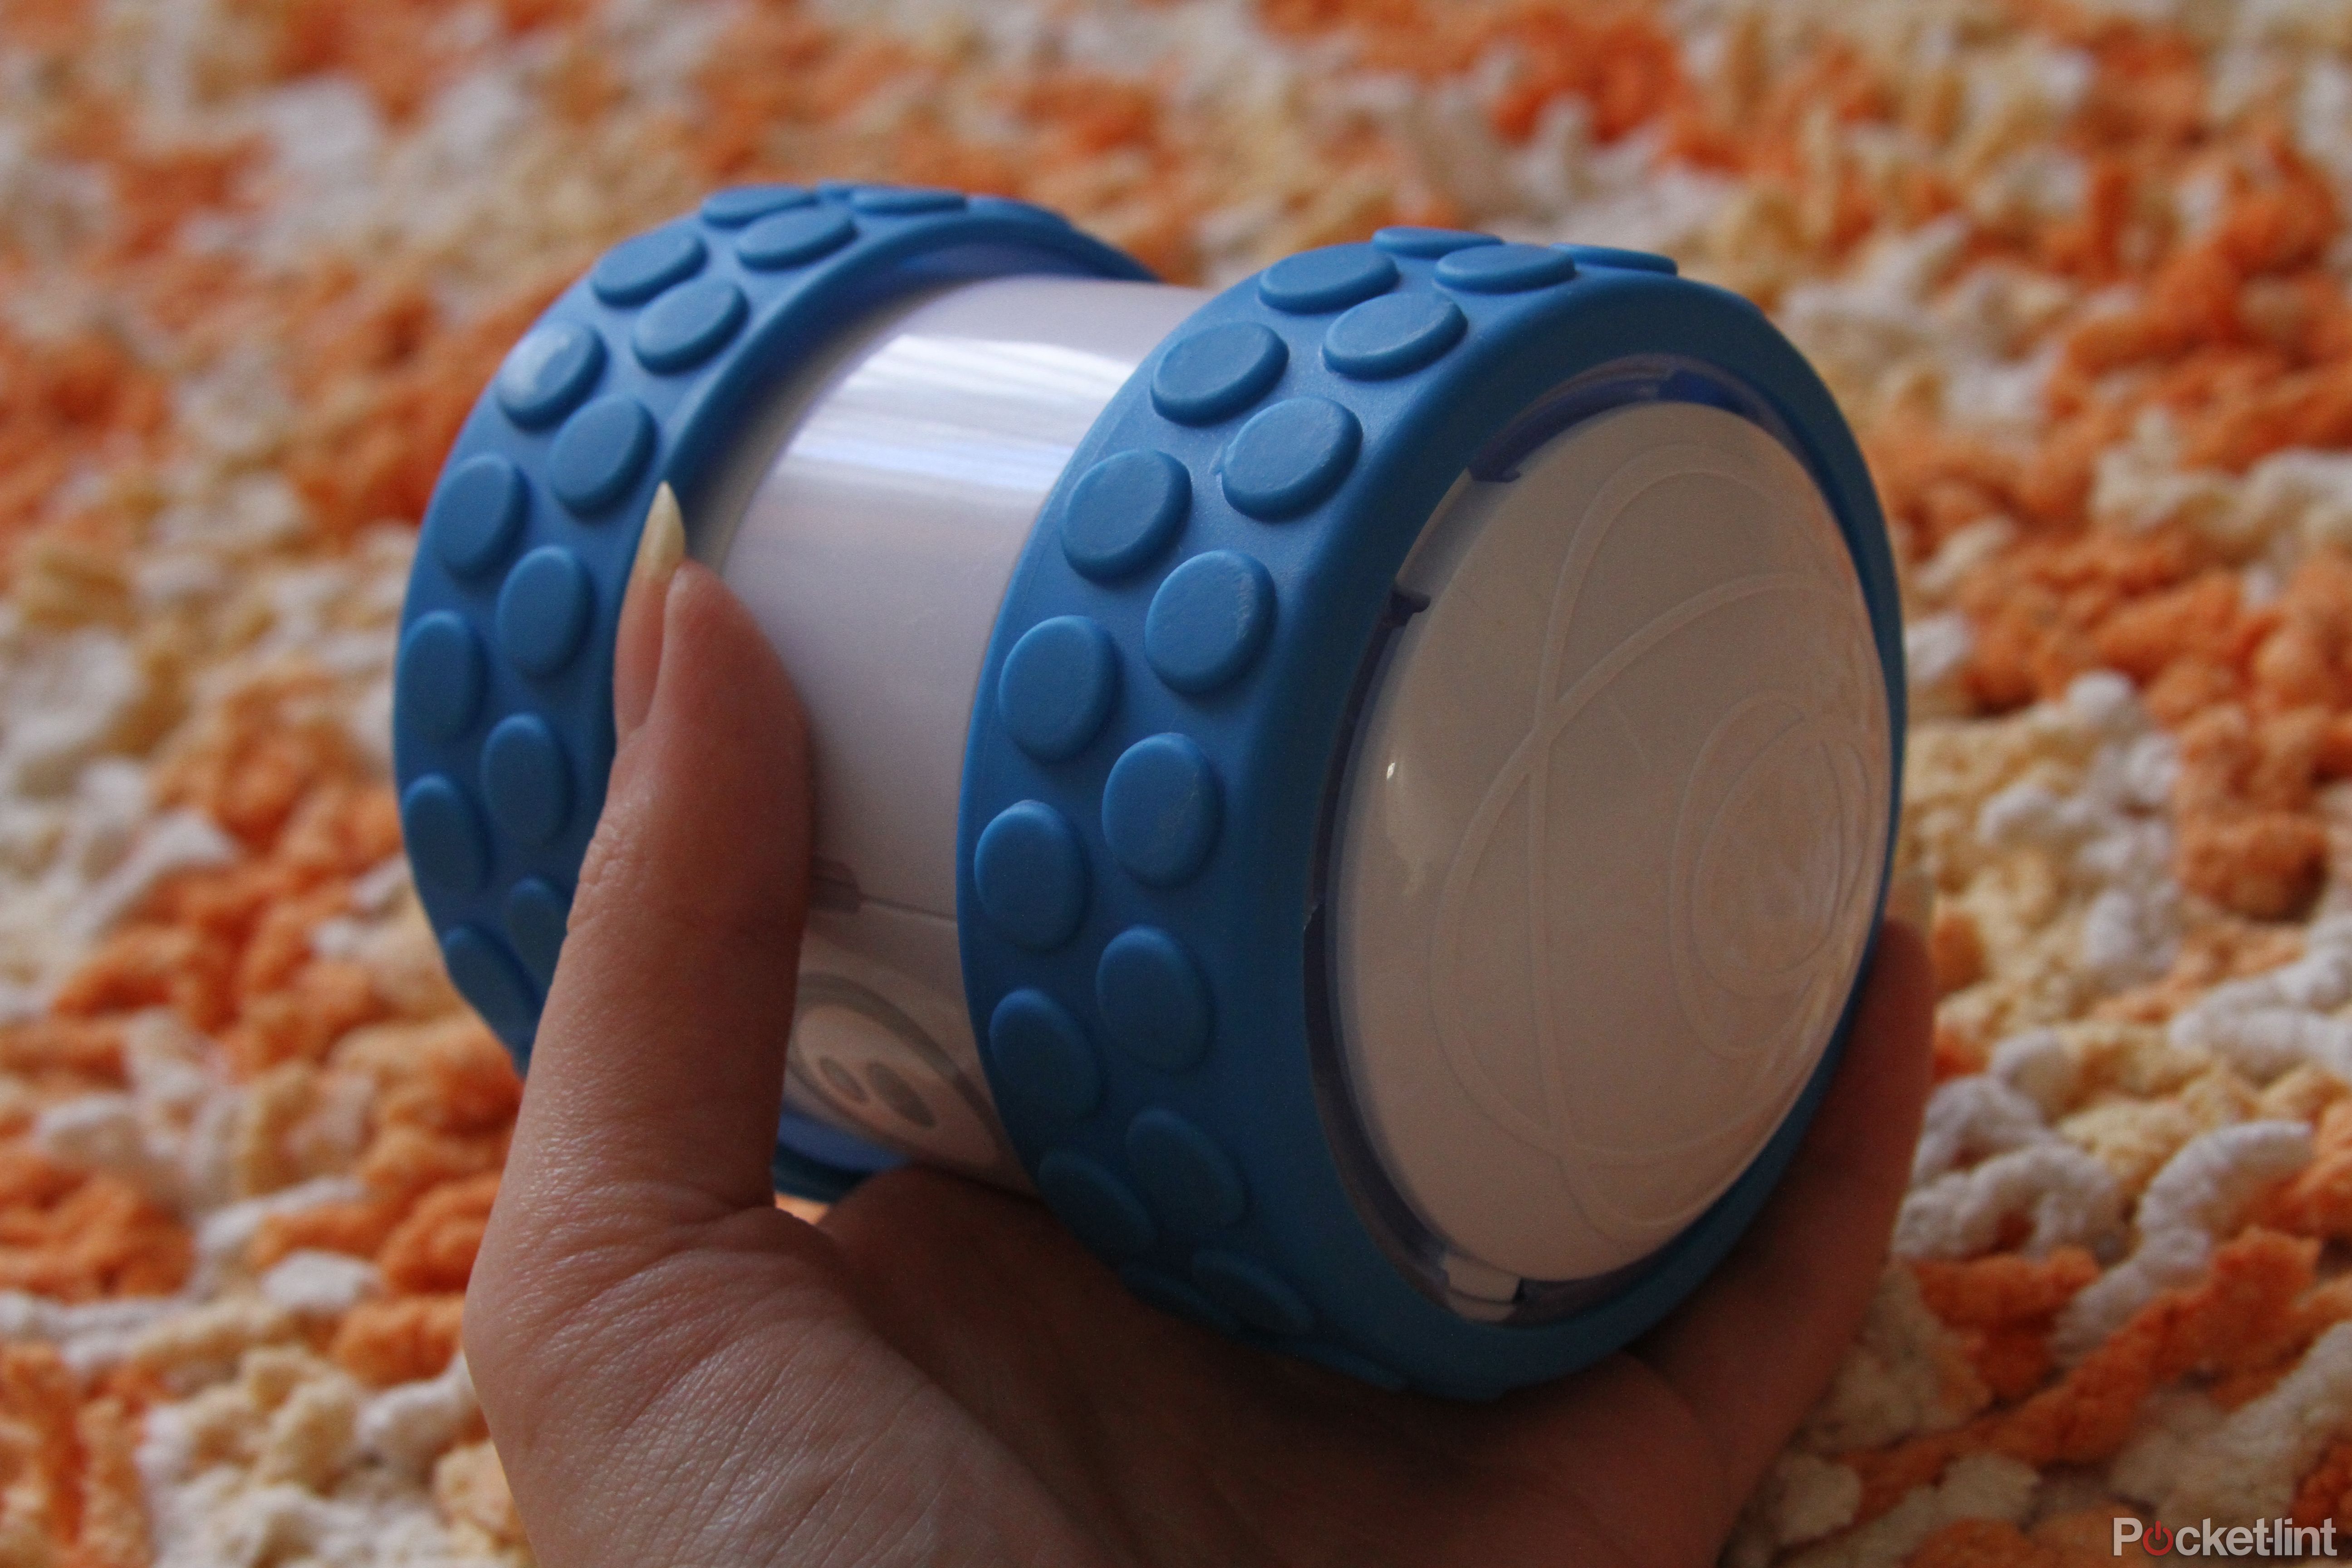 sphero ollie hands on review cylindrical fast and totally cool image 5